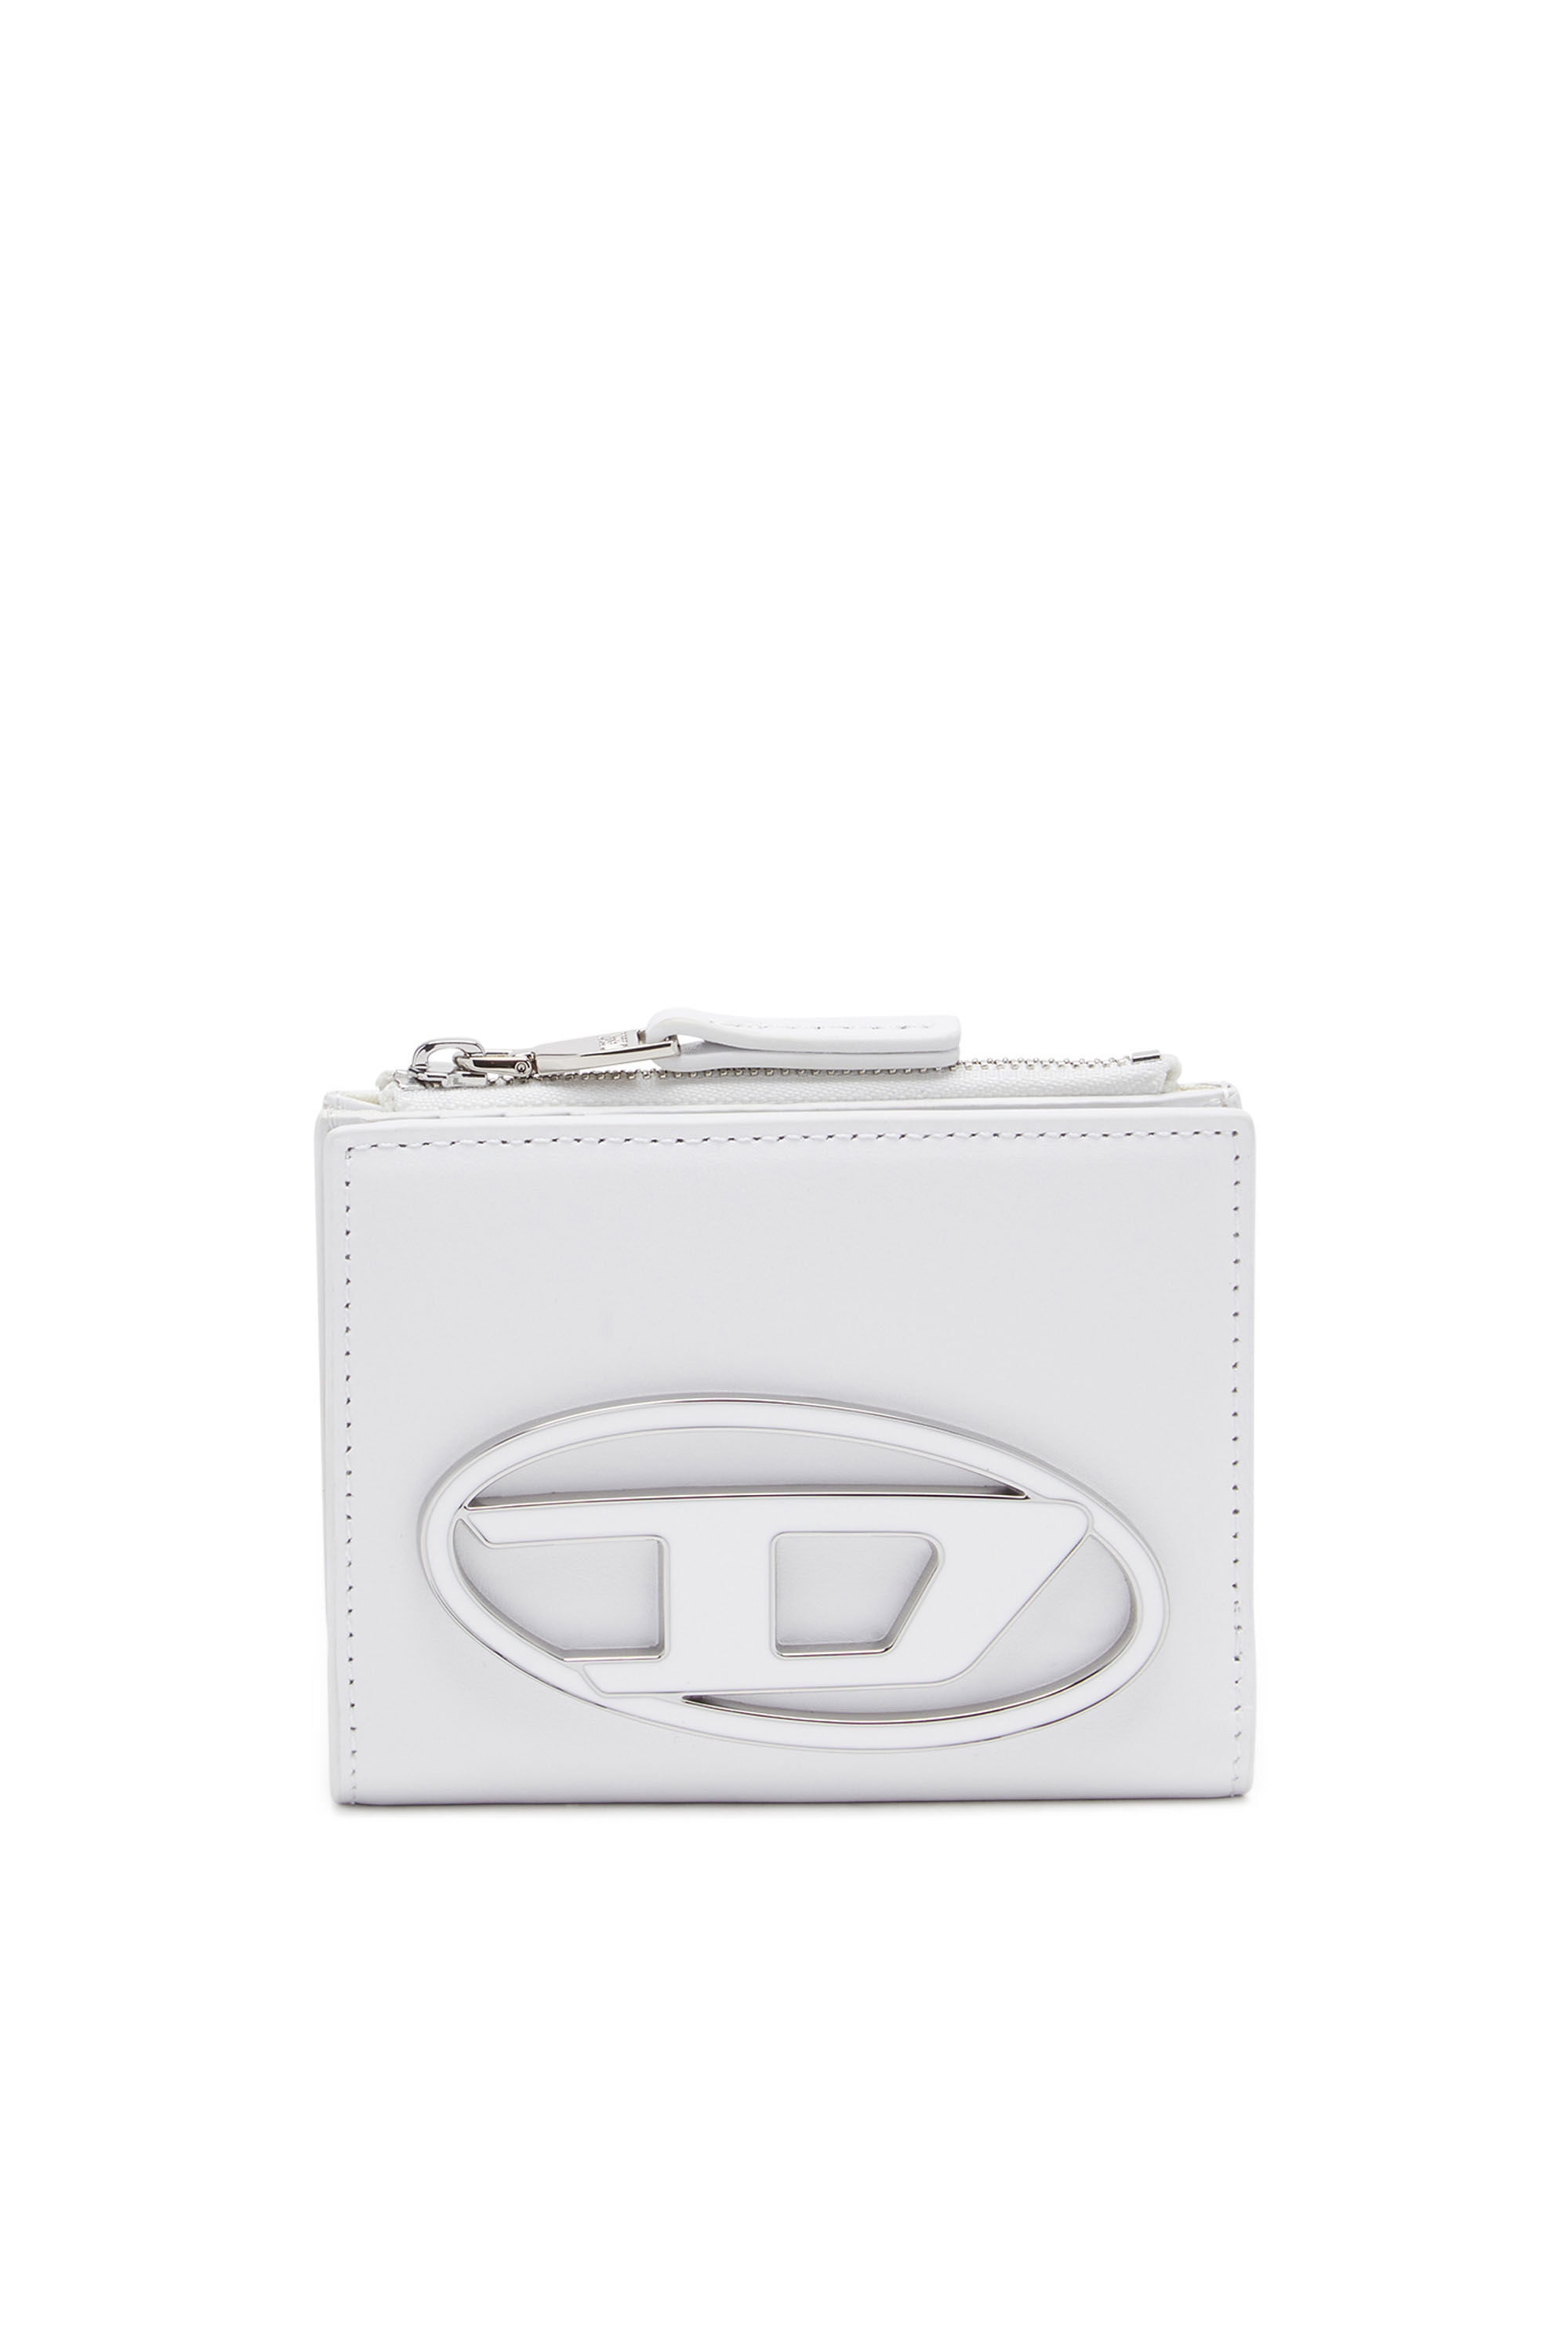 Women's Small leather wallet with logo plaque | 1DR BI-FOLD ZIP II